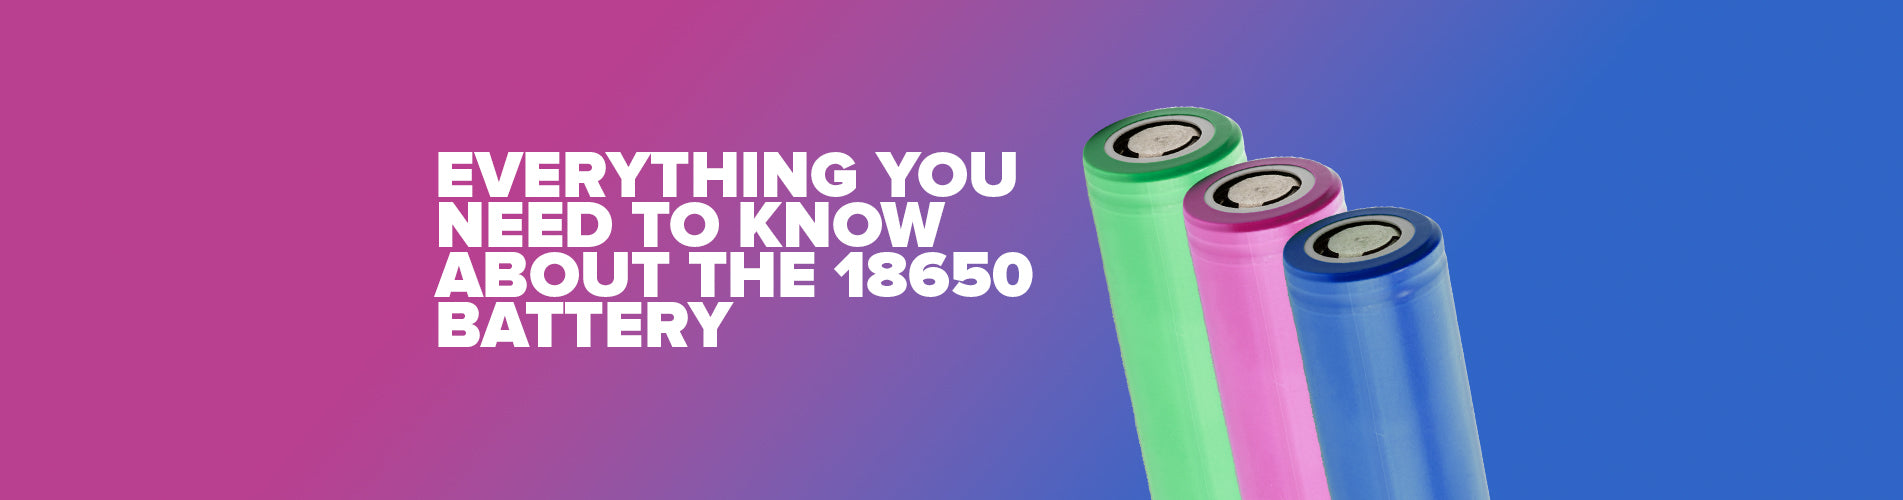 Beginner's guide to 18650 battery with easy-to-understand